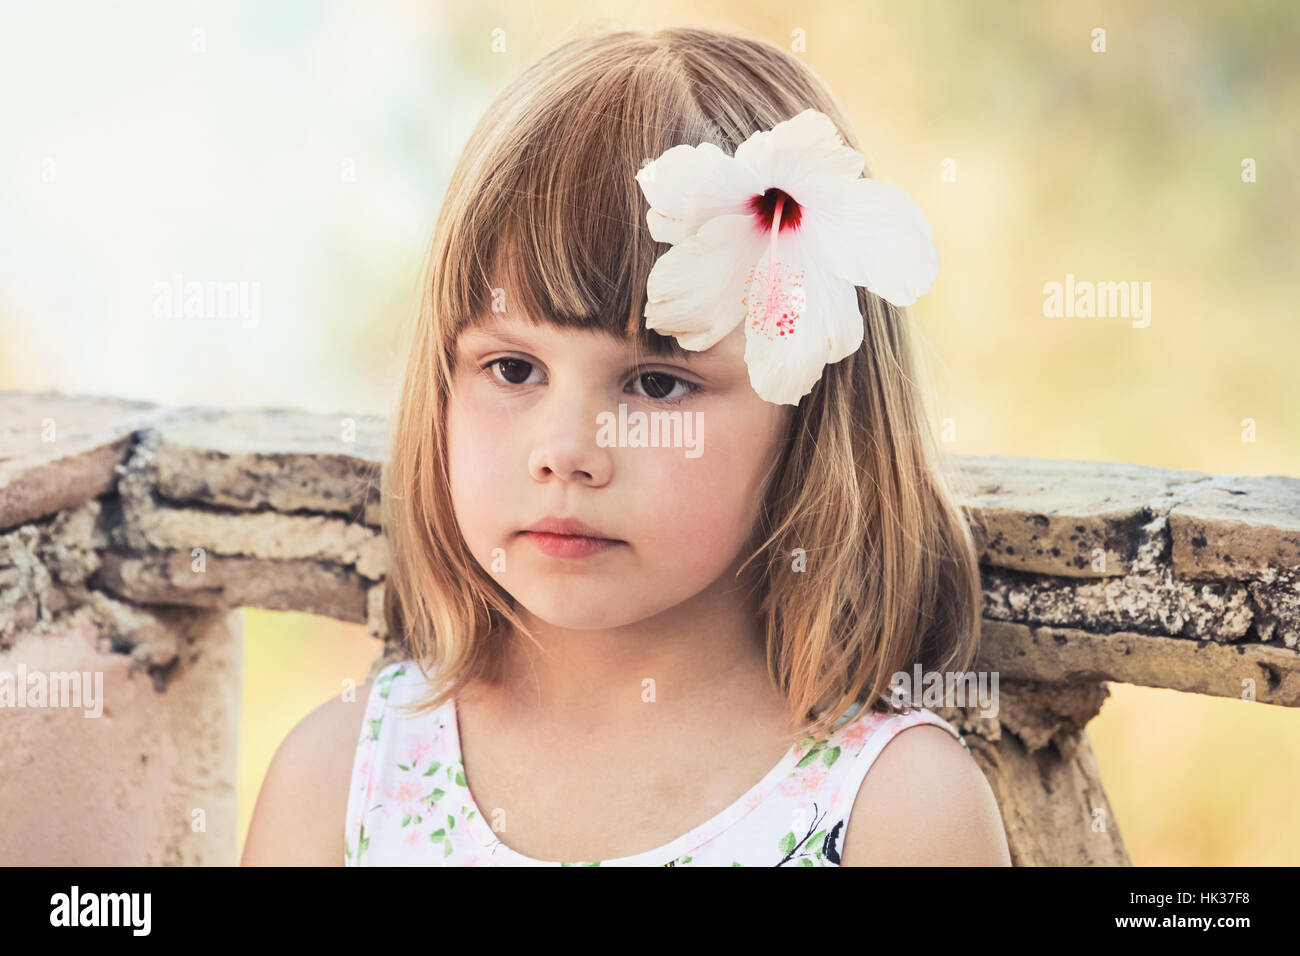 Serious Caucasian little girl with white flower in hair, close-up outdoor portrait, photo with old style tonal correction filter effect Stock Photo